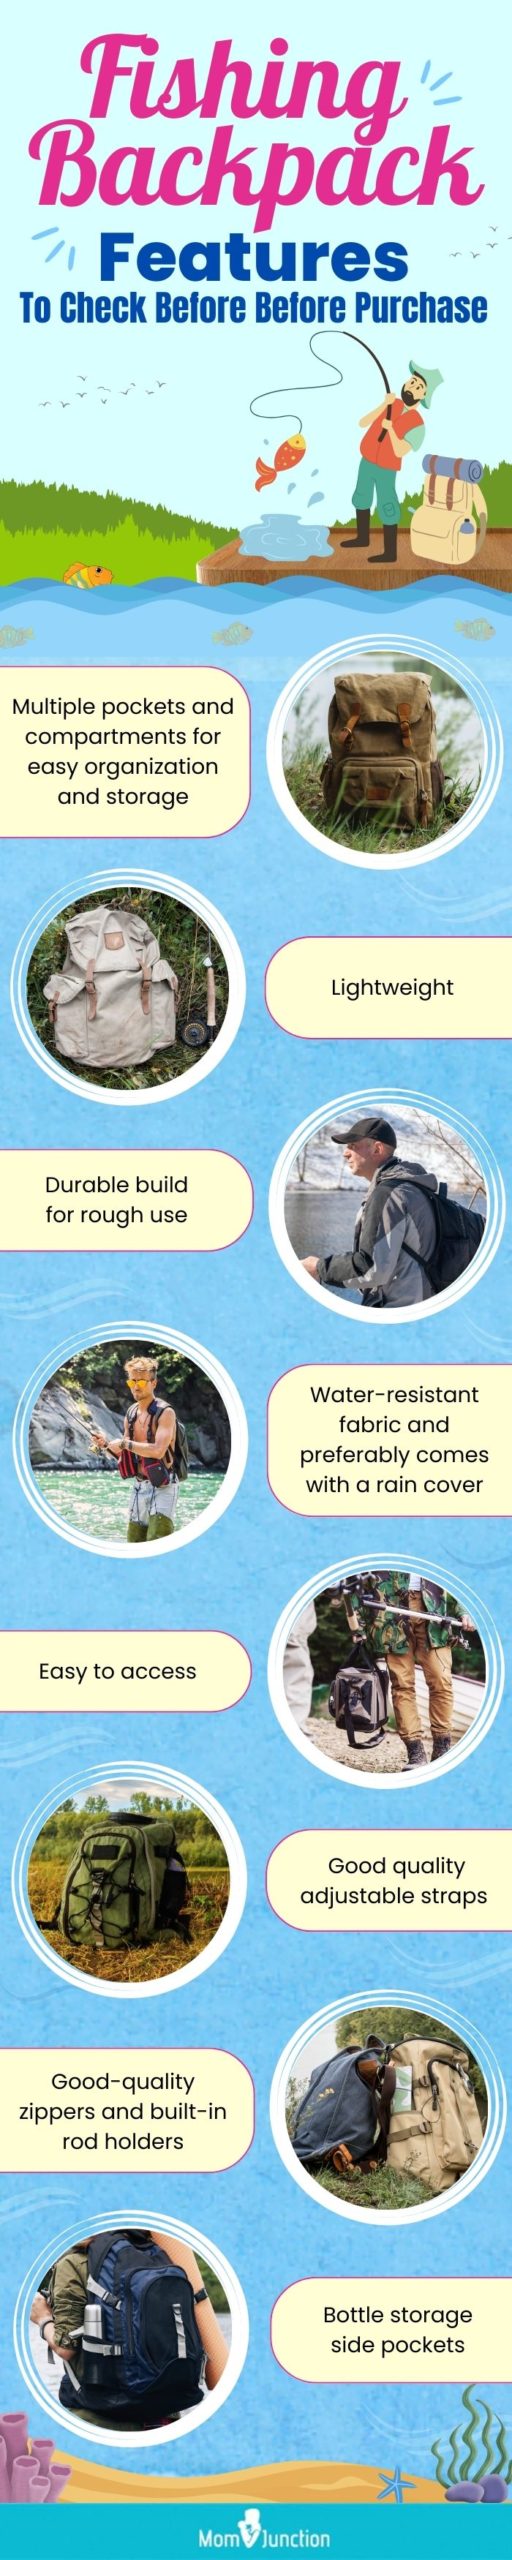 Fishing Backpack Features To Check Before Purchase (infographic)